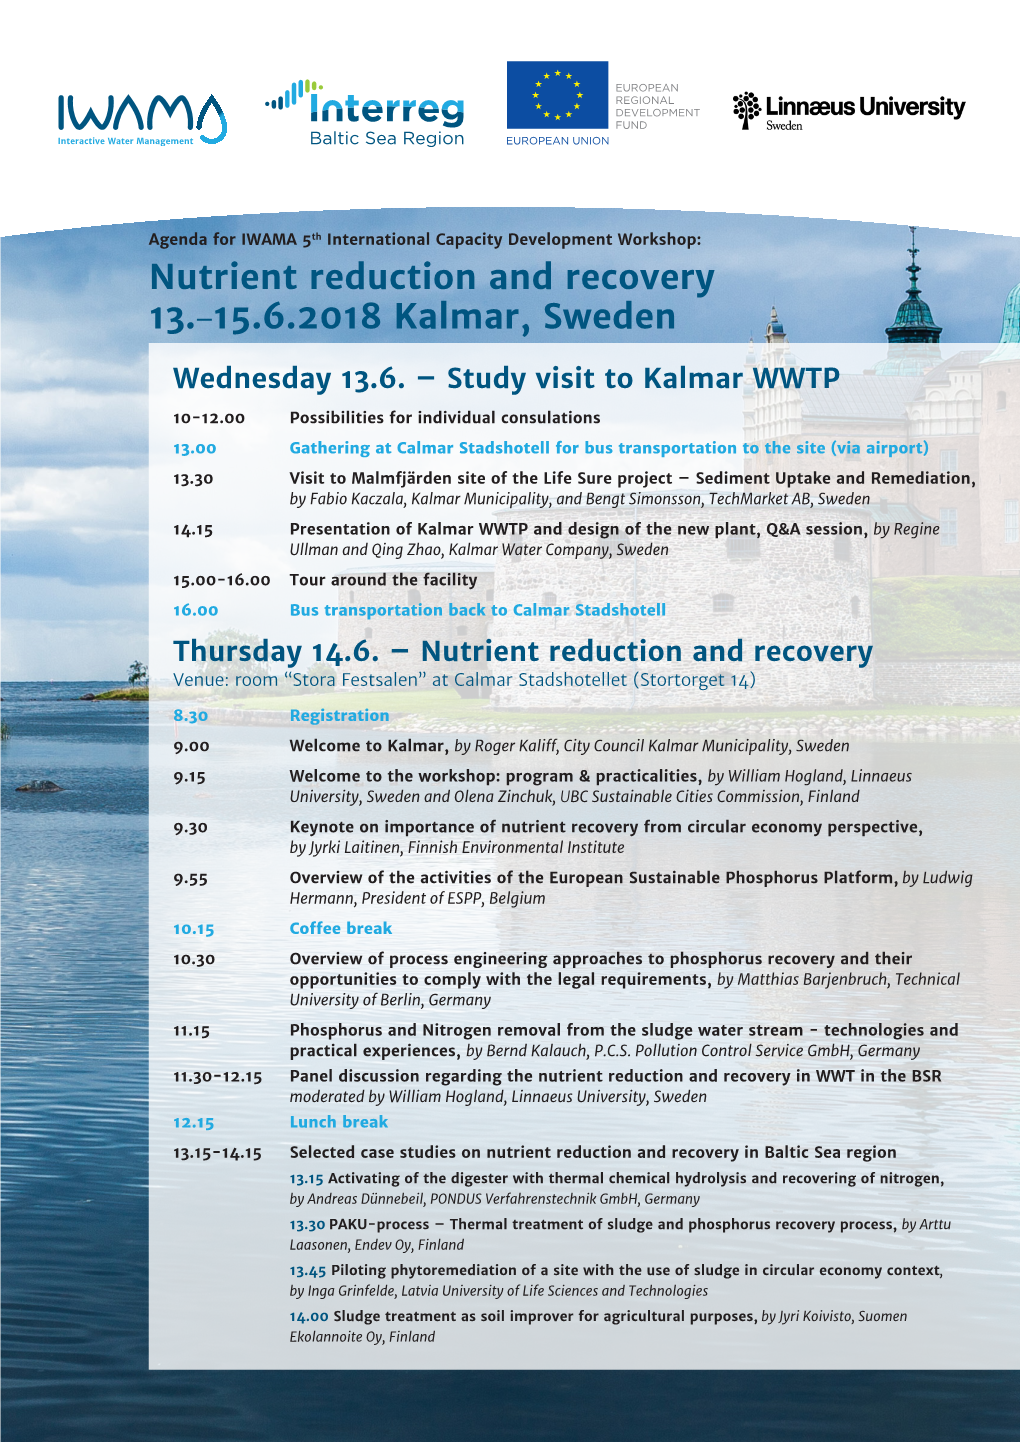 Nutrient Reduction and Recovery 13.-15.6.2018 Kalmar, Sweden